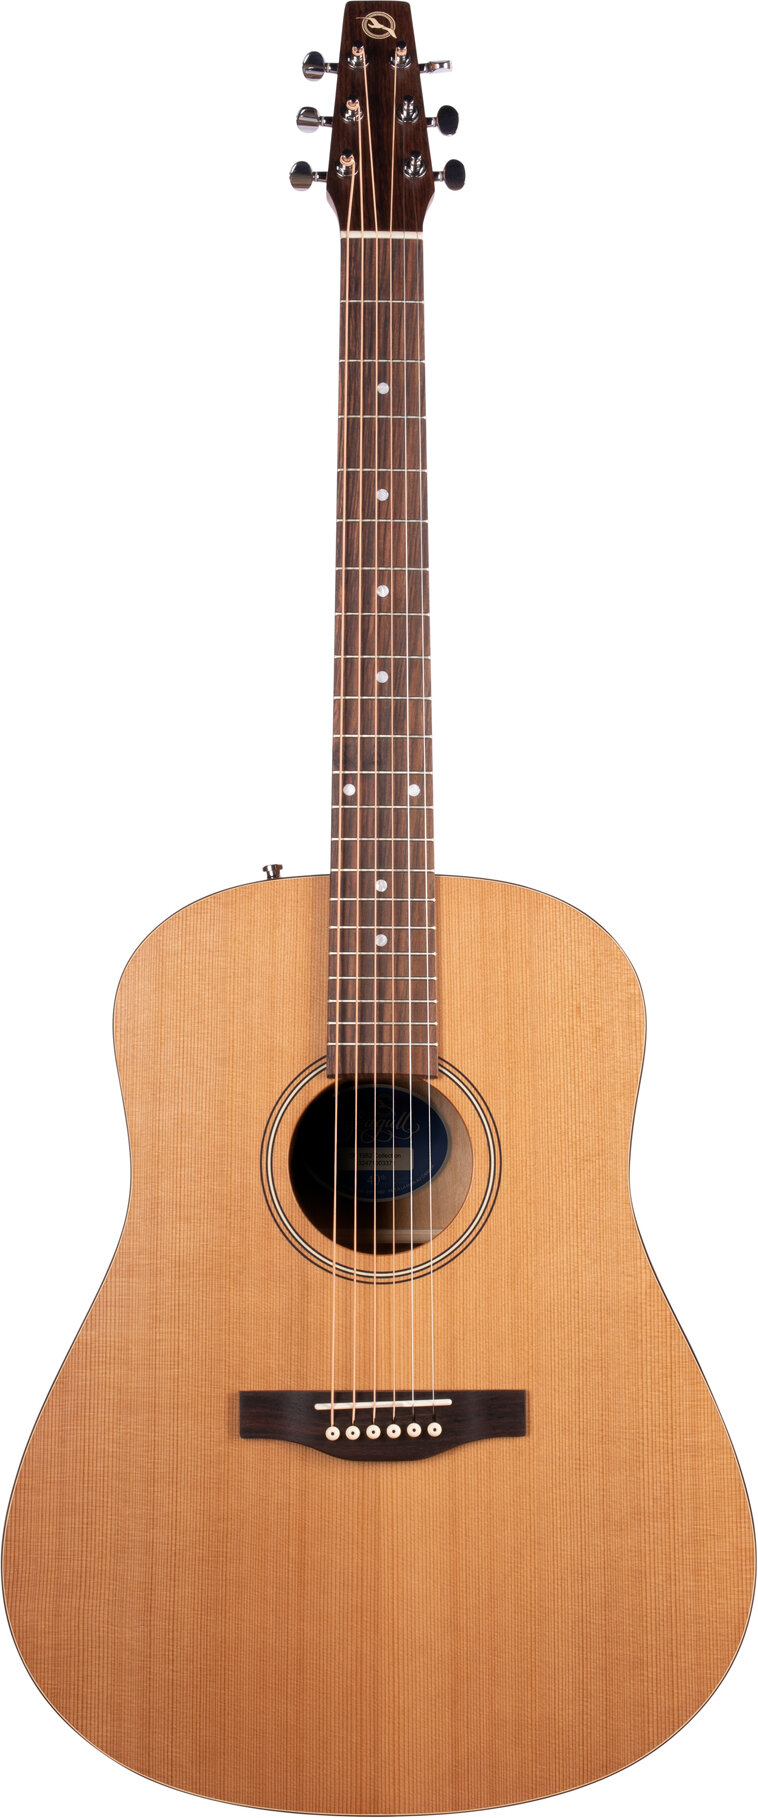 Seagull S6 Collection 1982 Acoustic Guitar Natural -  052431